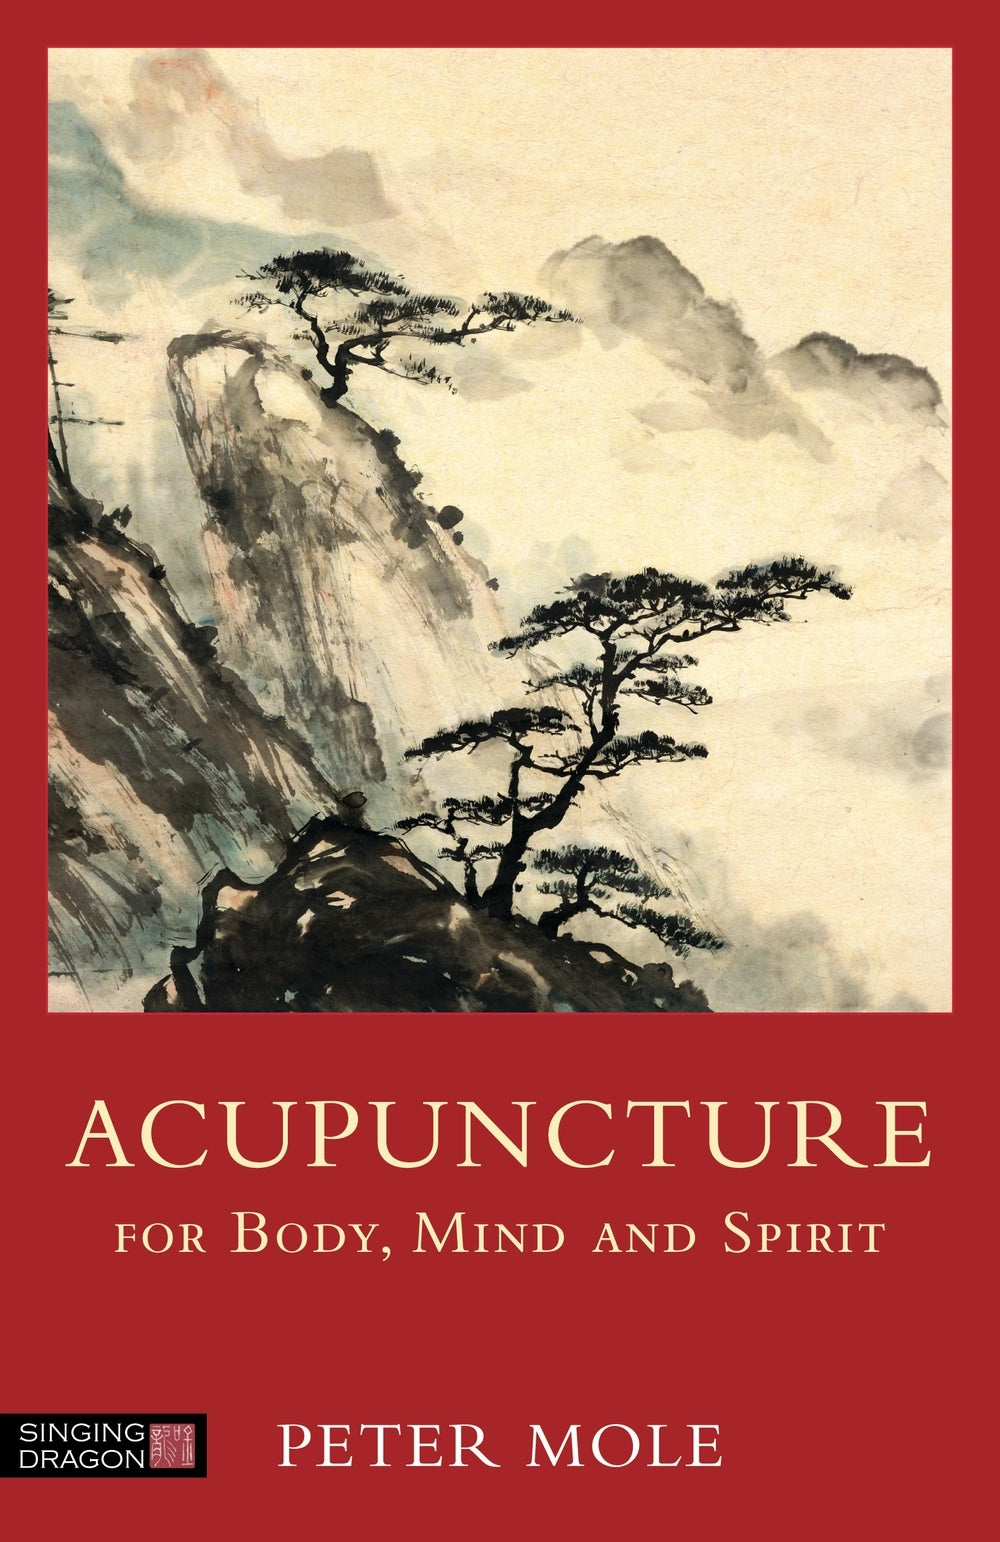 Acupuncture for Body, Mind and Spirit by Peter Mole